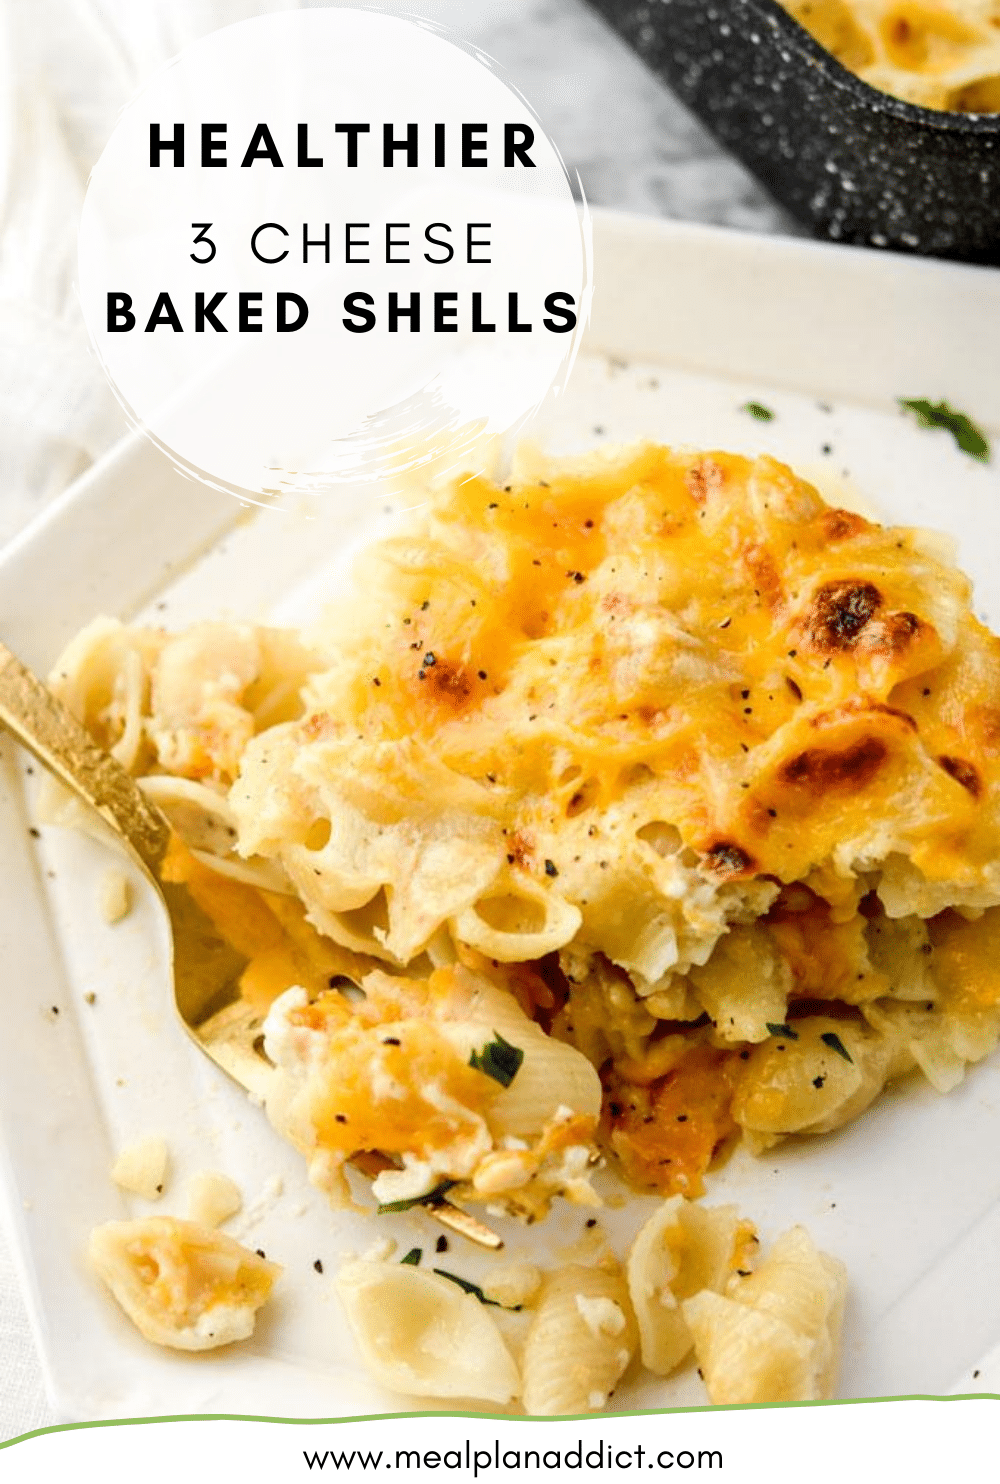 Healthier 3 Cheese Baked Shells